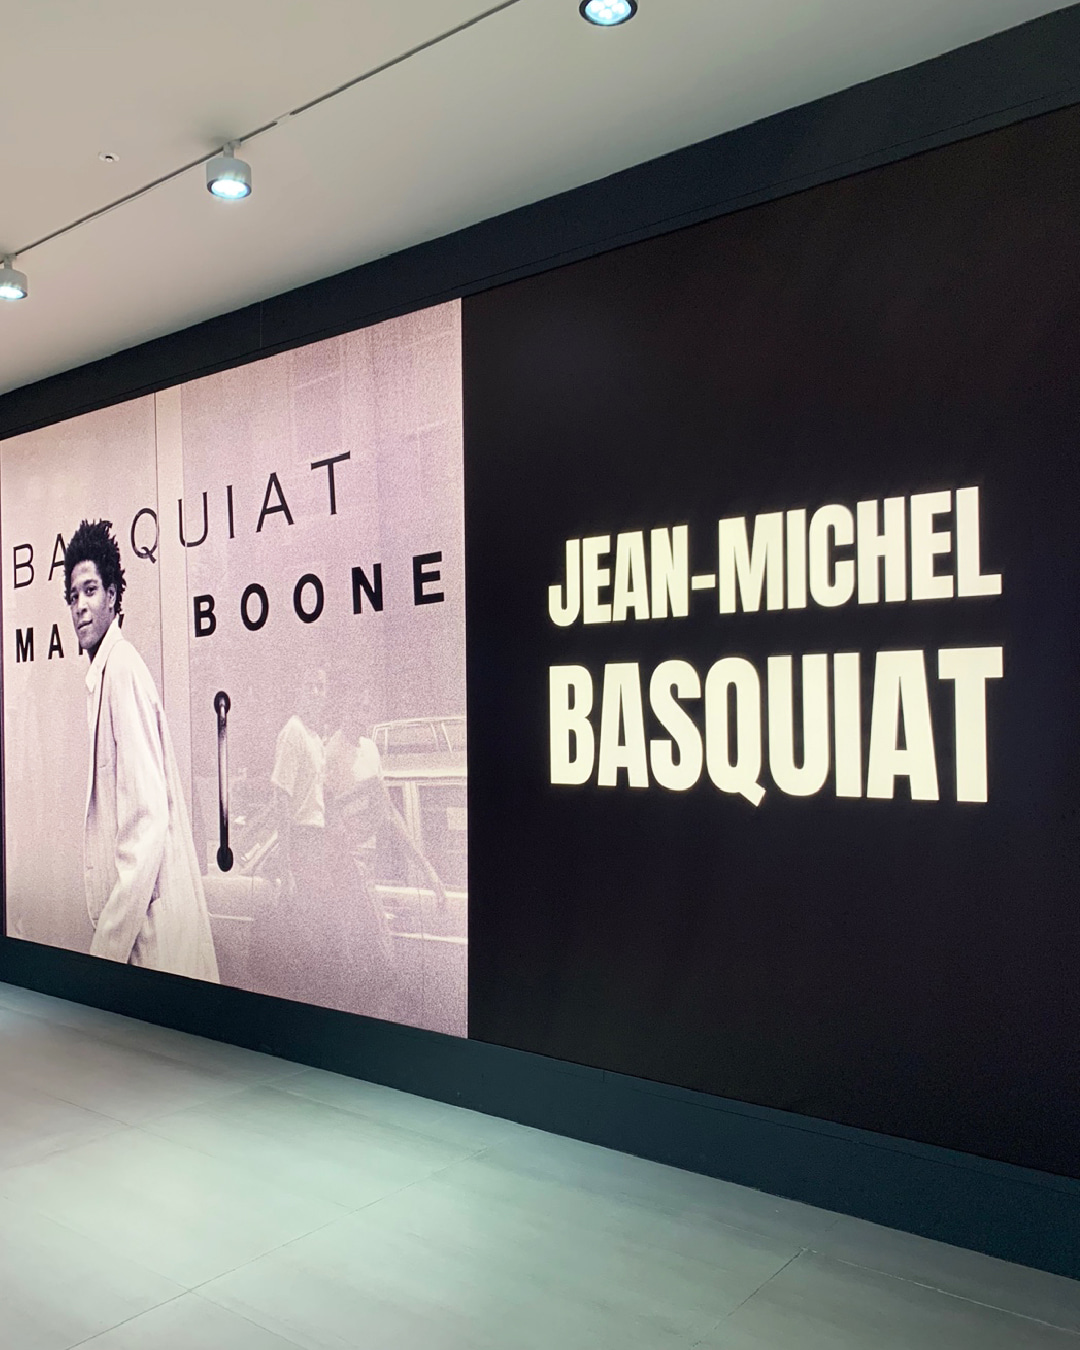 Royalty, Heroism, and the Streets_JEAN-MICHEL BASQUIAT  Part1.